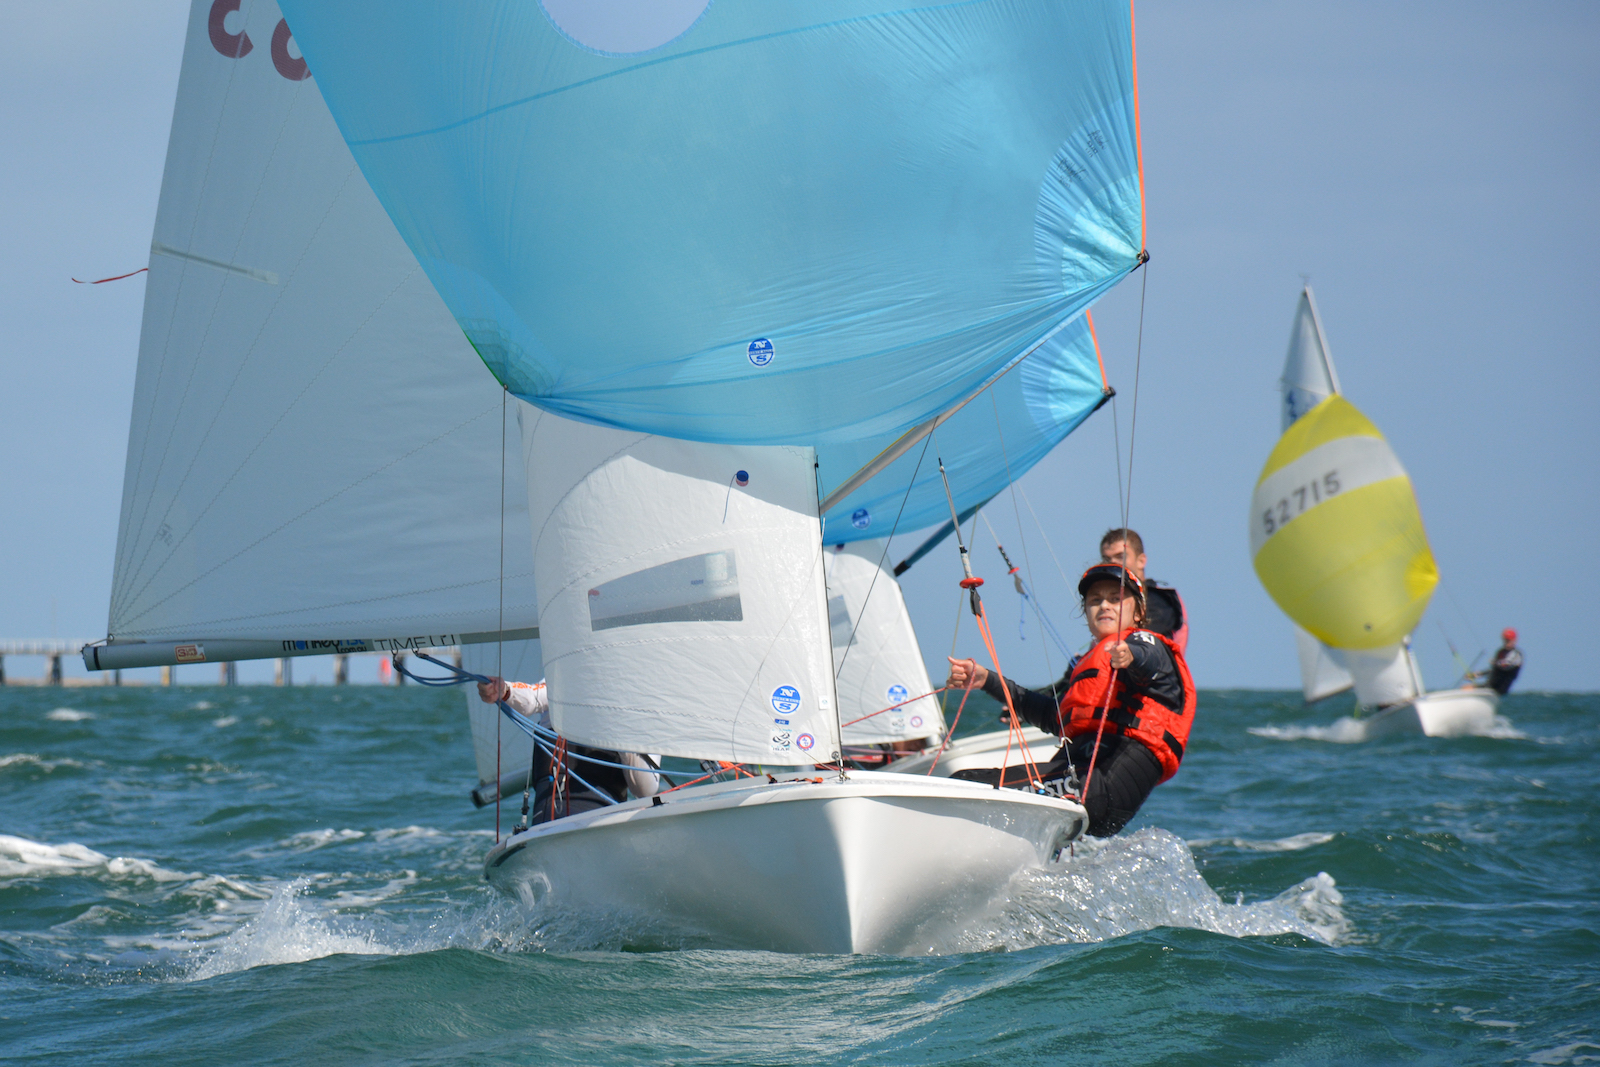 SA Youth Champs | Sailors prepare for states after massive summer